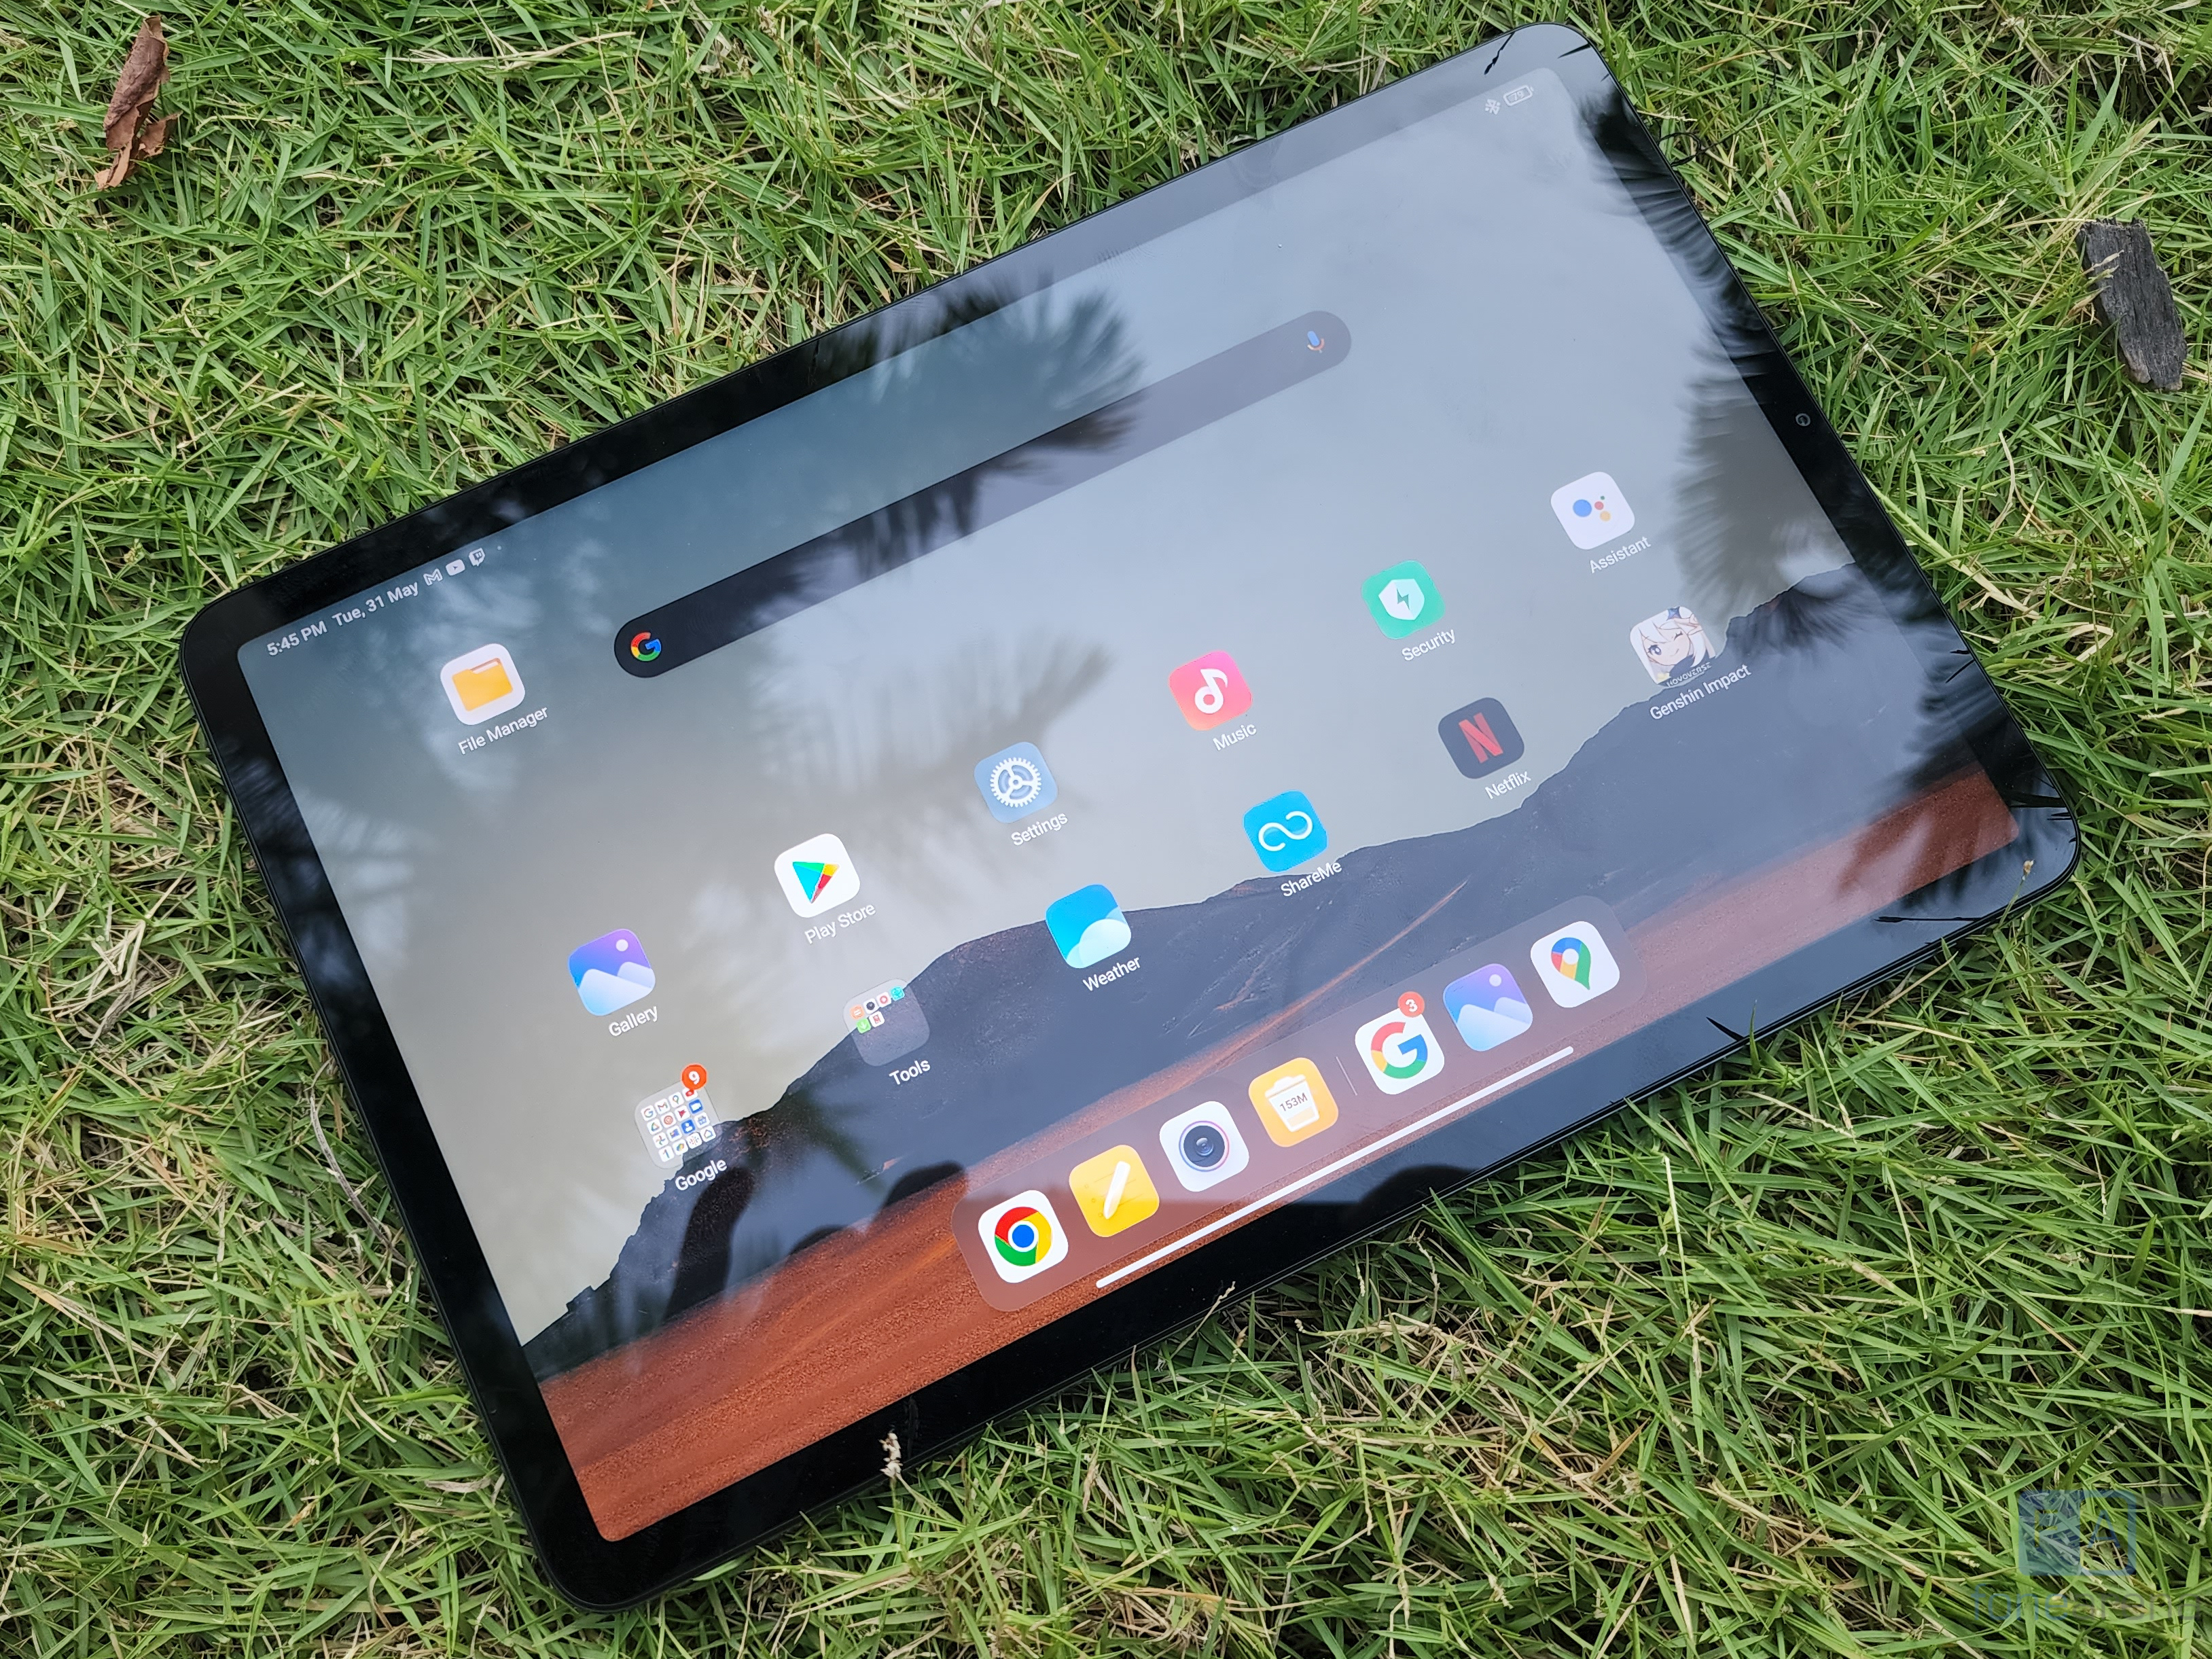 Xiaomi Pad 5 Tablet review - Android-Alternative to the cheapest iPad -   Reviews